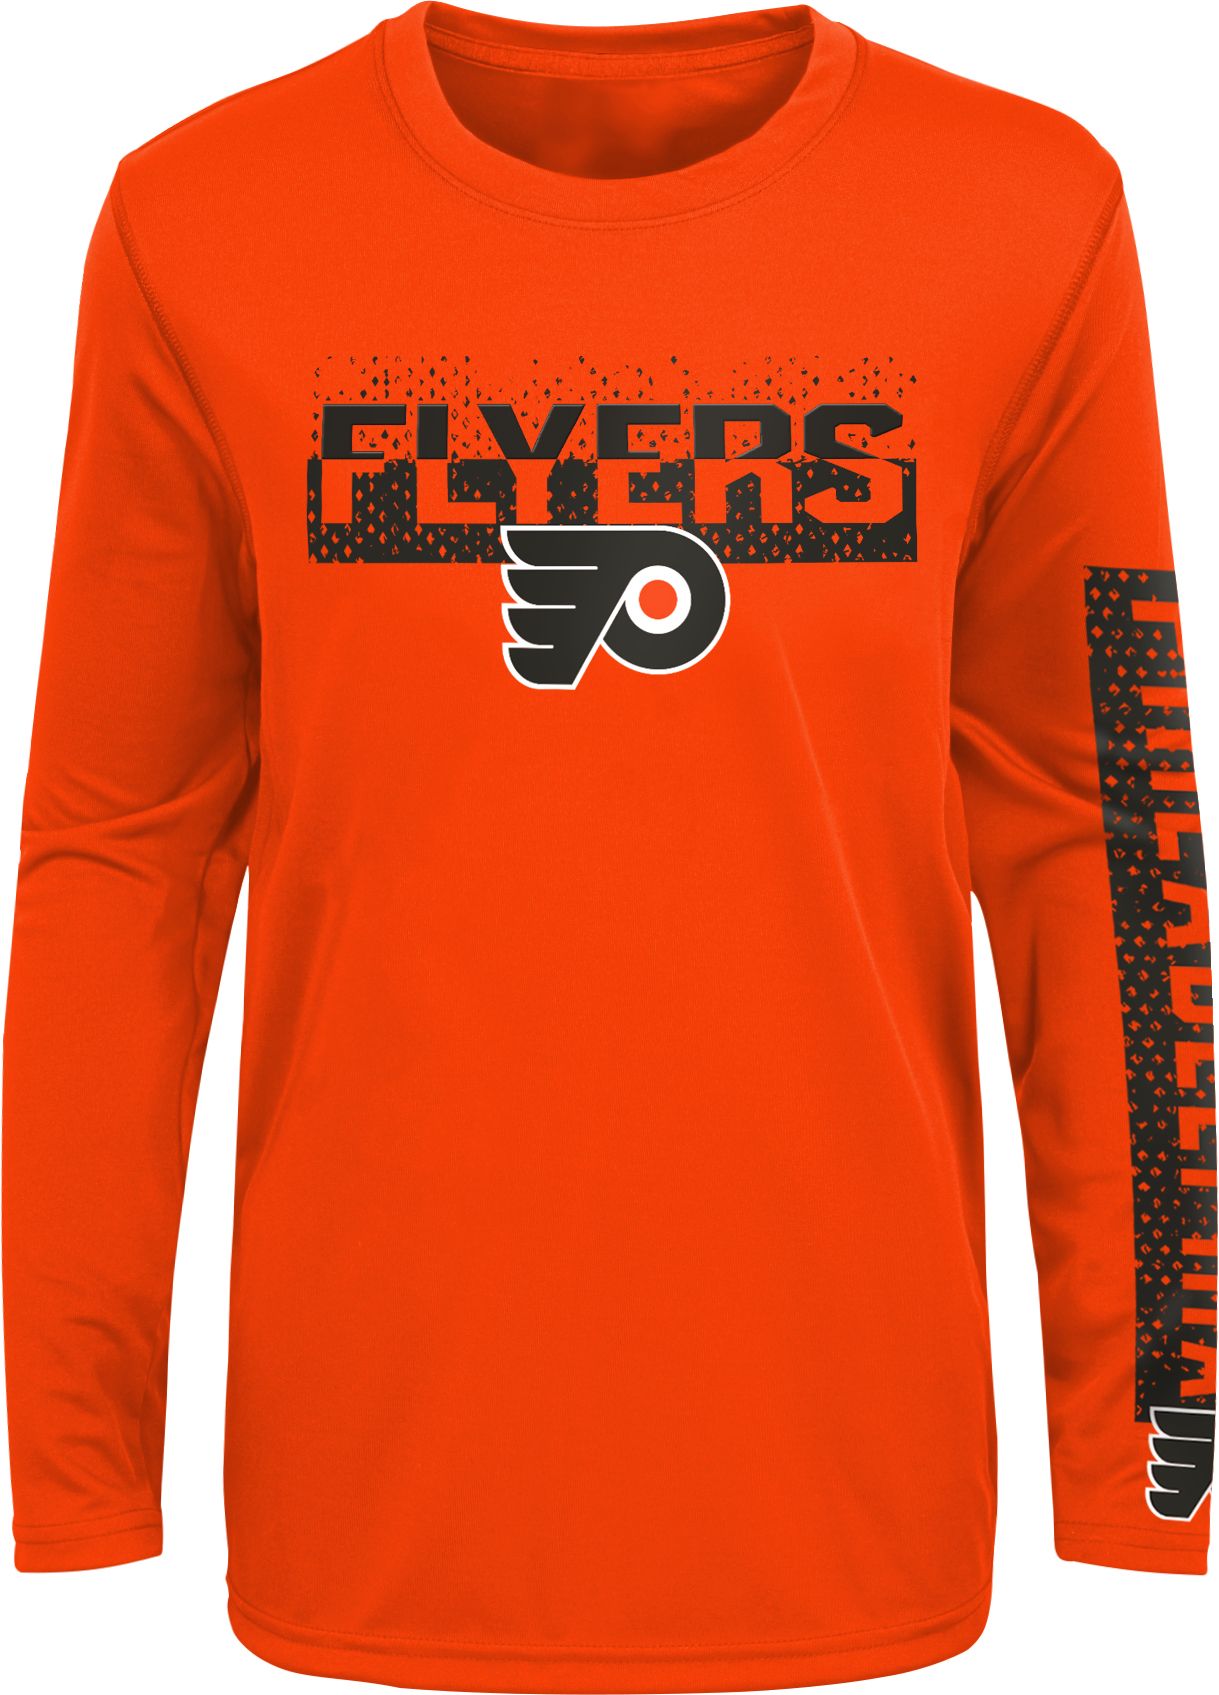 youth flyers shirt